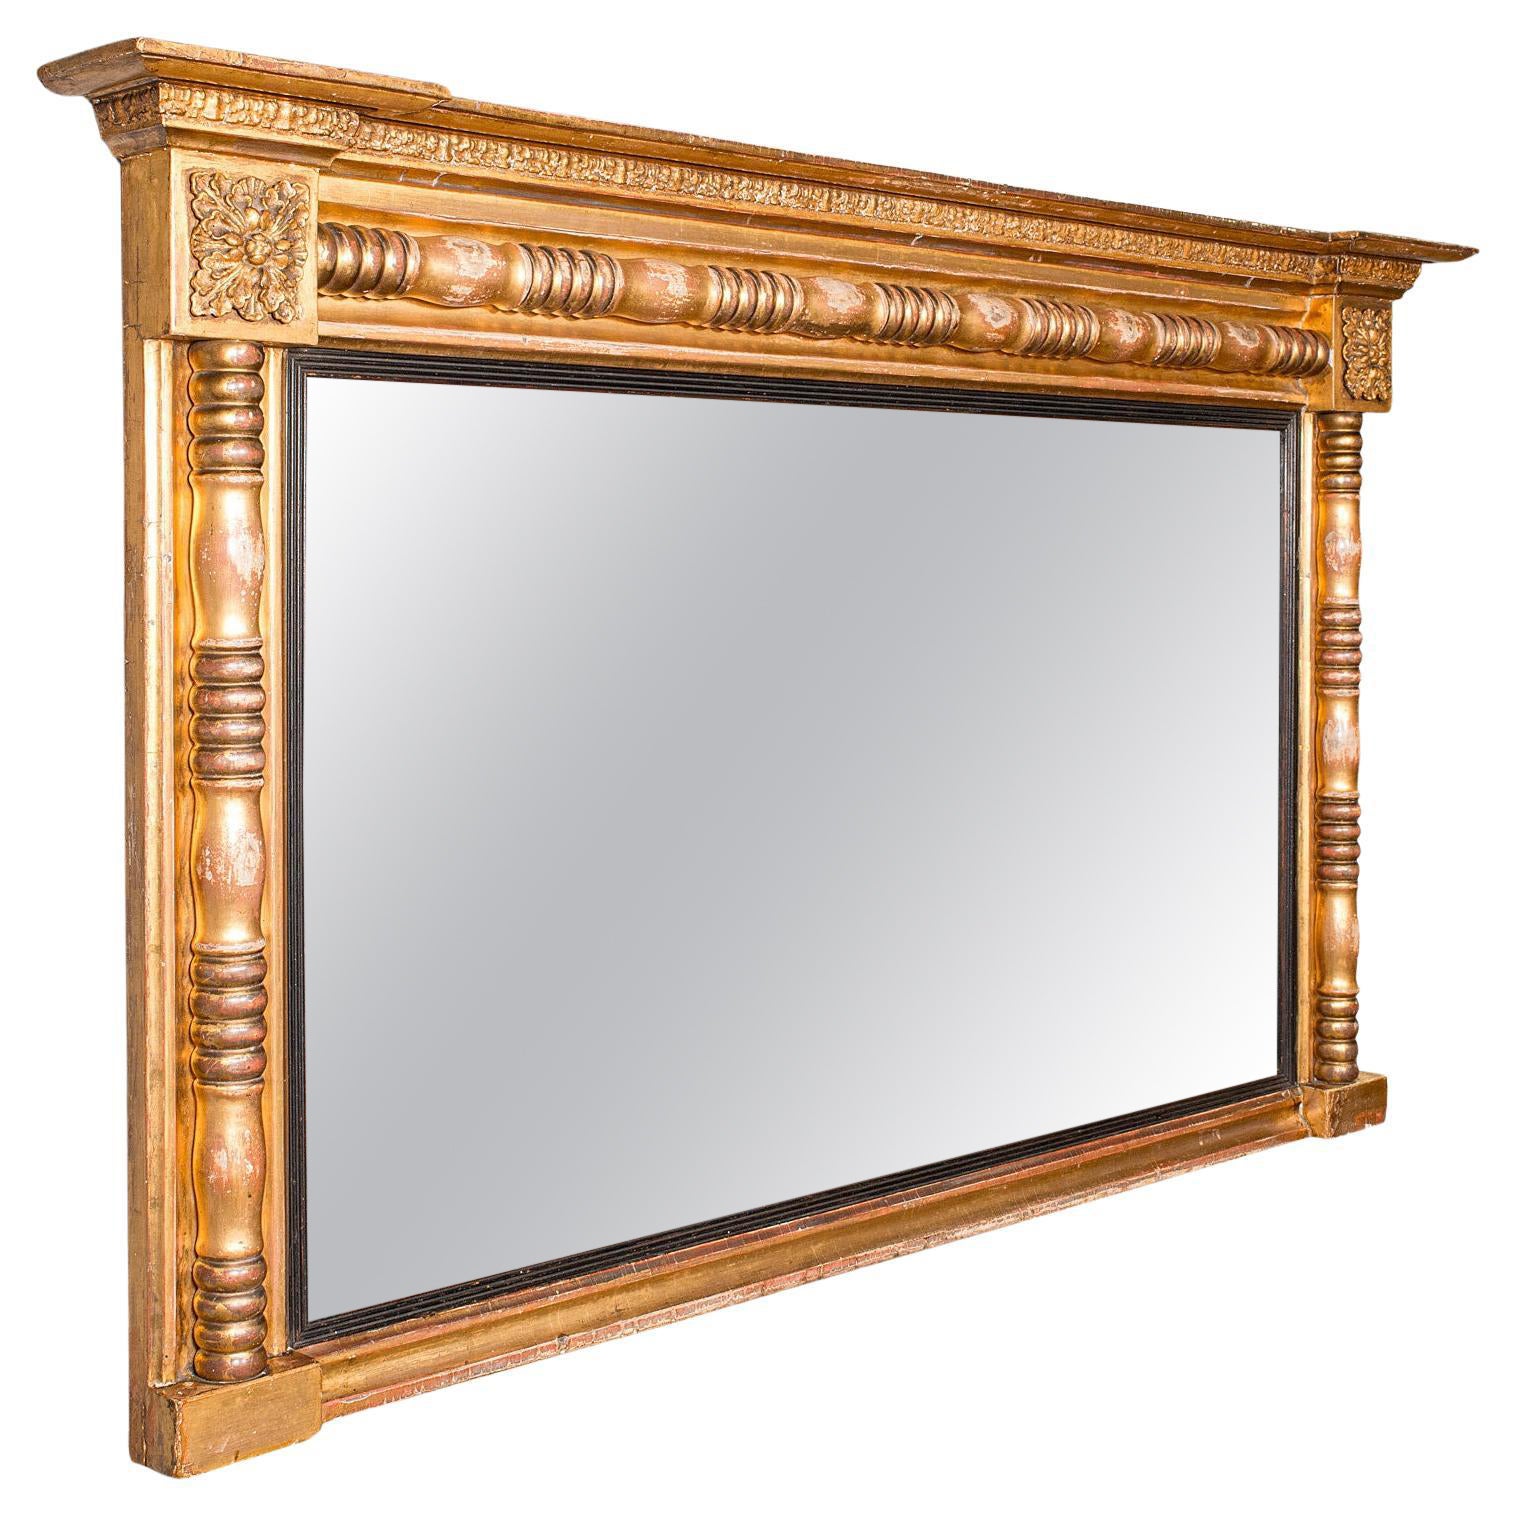 Large Antique Overmantle Mirror, English, Giltwood, Mercury Glass, Regency, 1820 For Sale